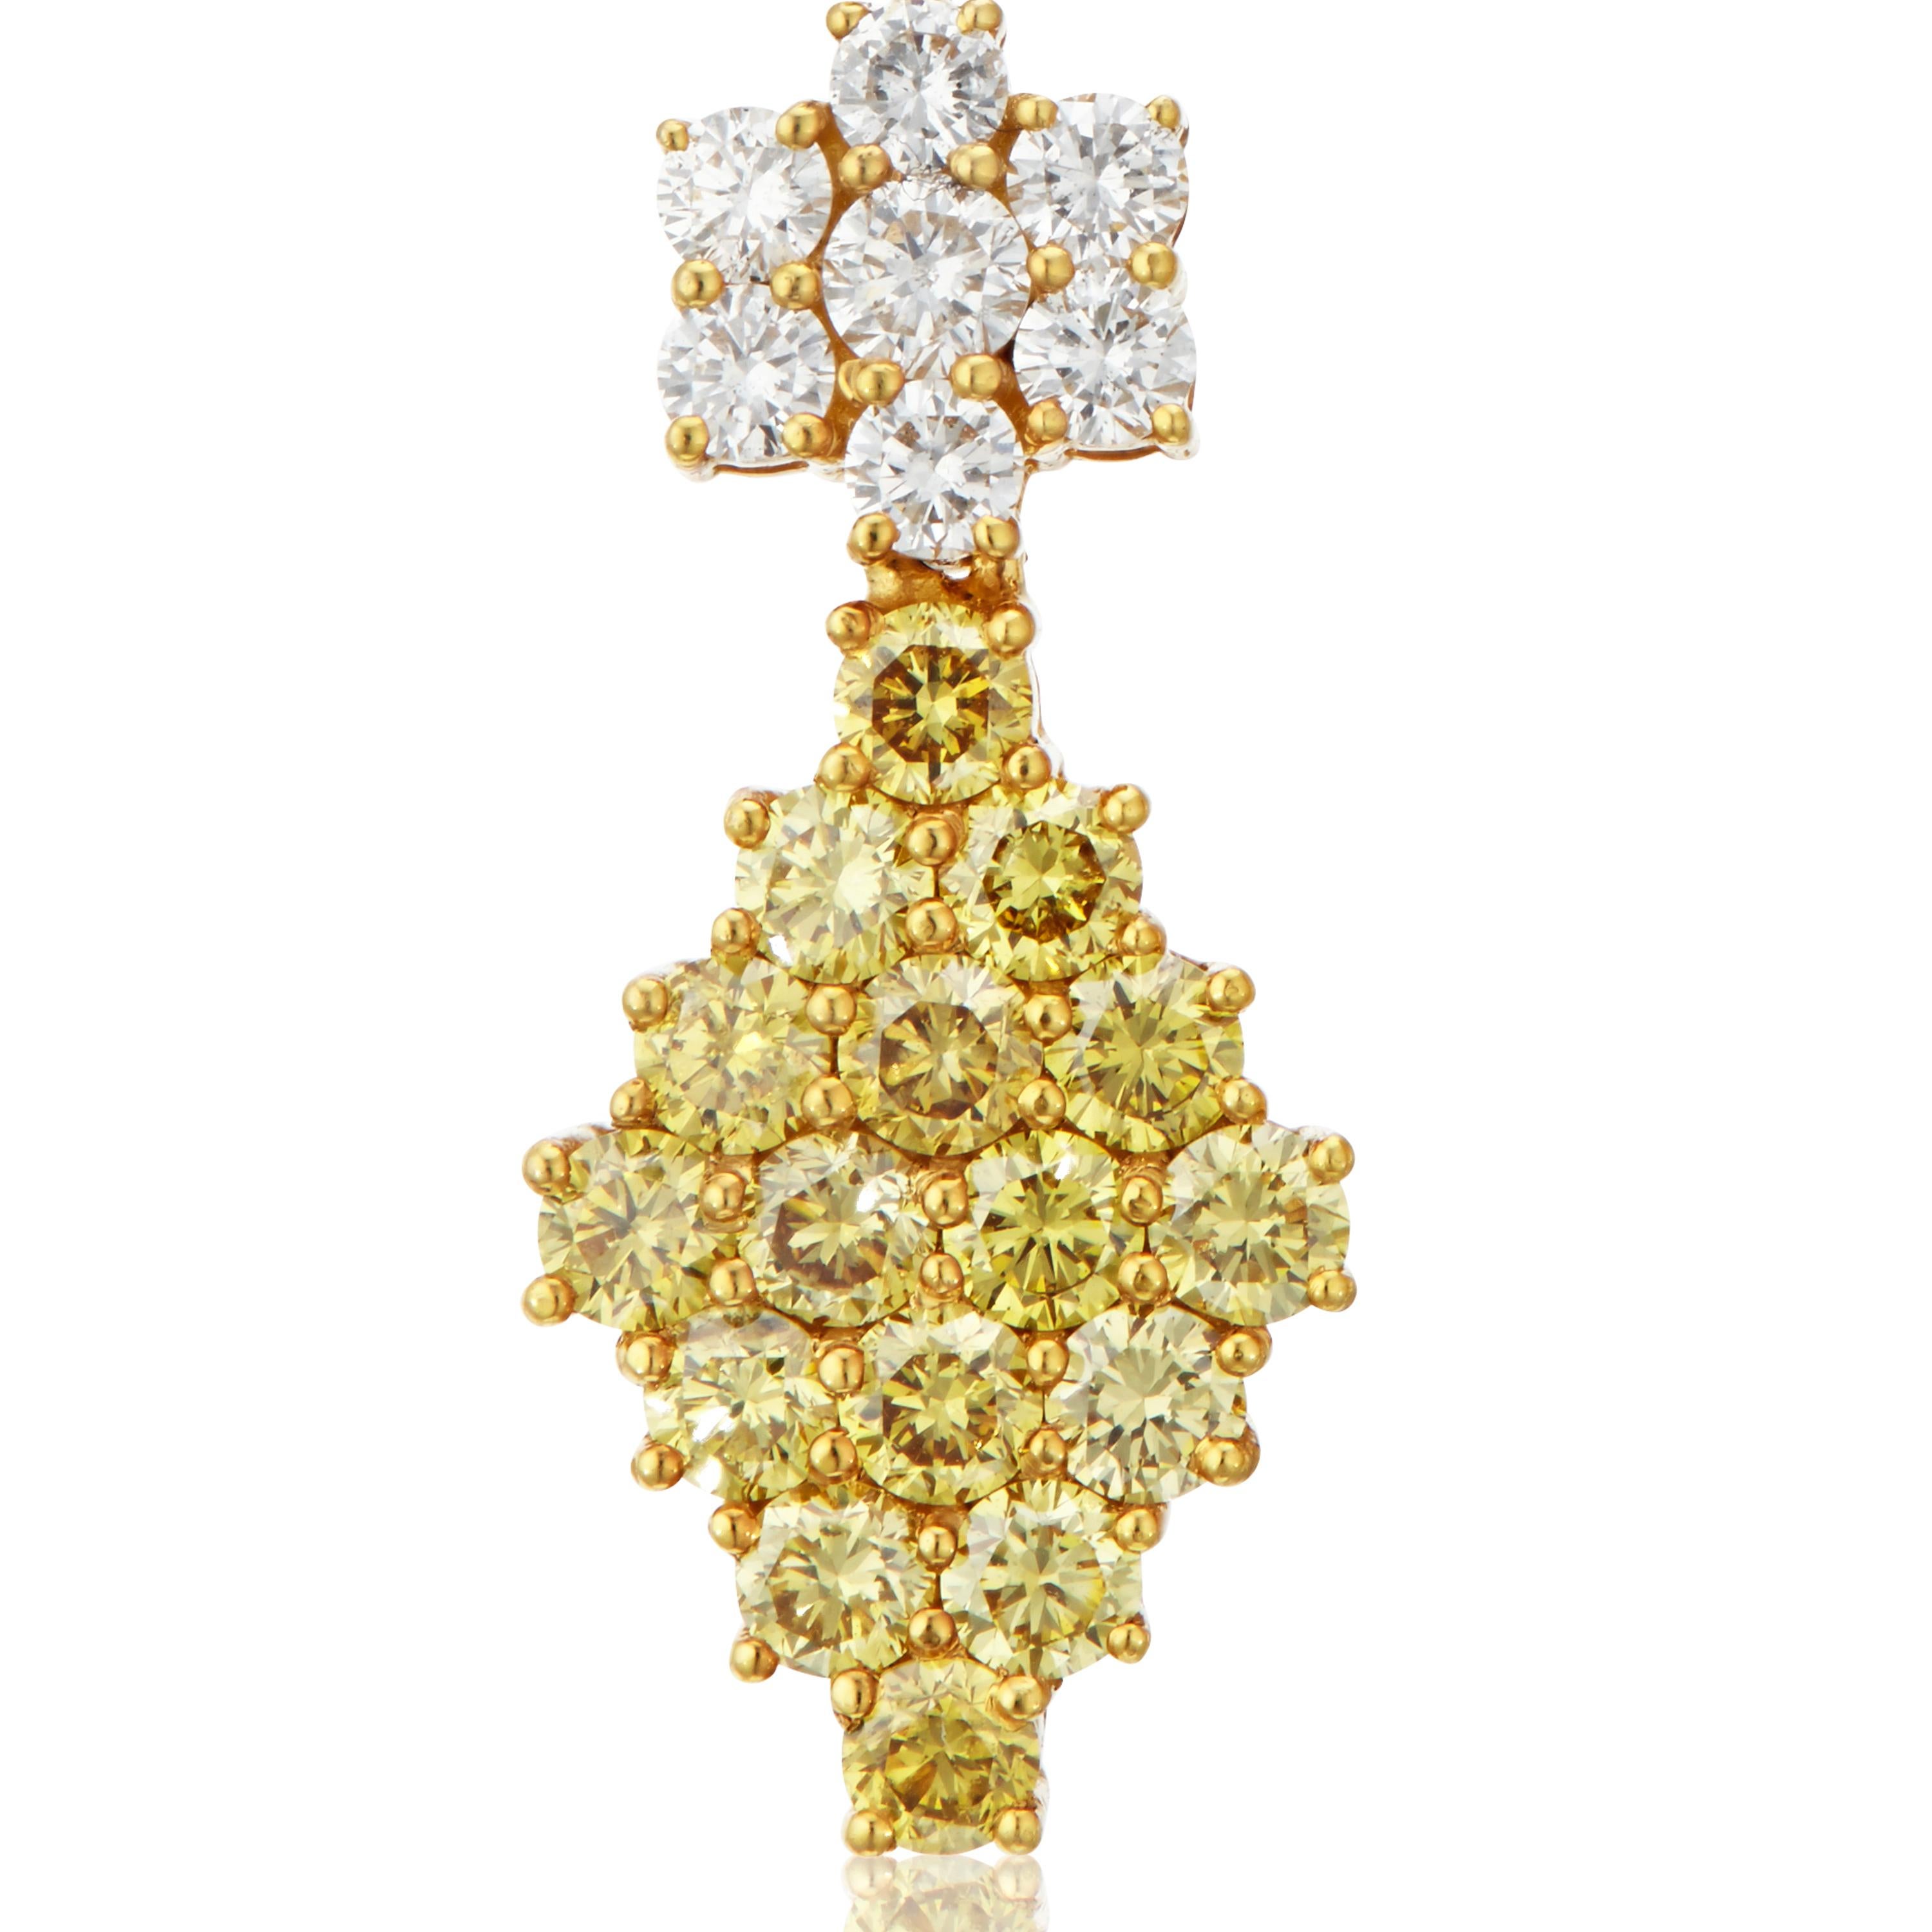 Combined diamond weight in the pair of earrings is  2.71-carats. 
This item's measurements are:
Length: 4 cm 
Width: 1 cm 

From the exclusive Manpriya B's Atelier collection, this Art Deco-inspired piece features gorgeous yellow and white brilliant